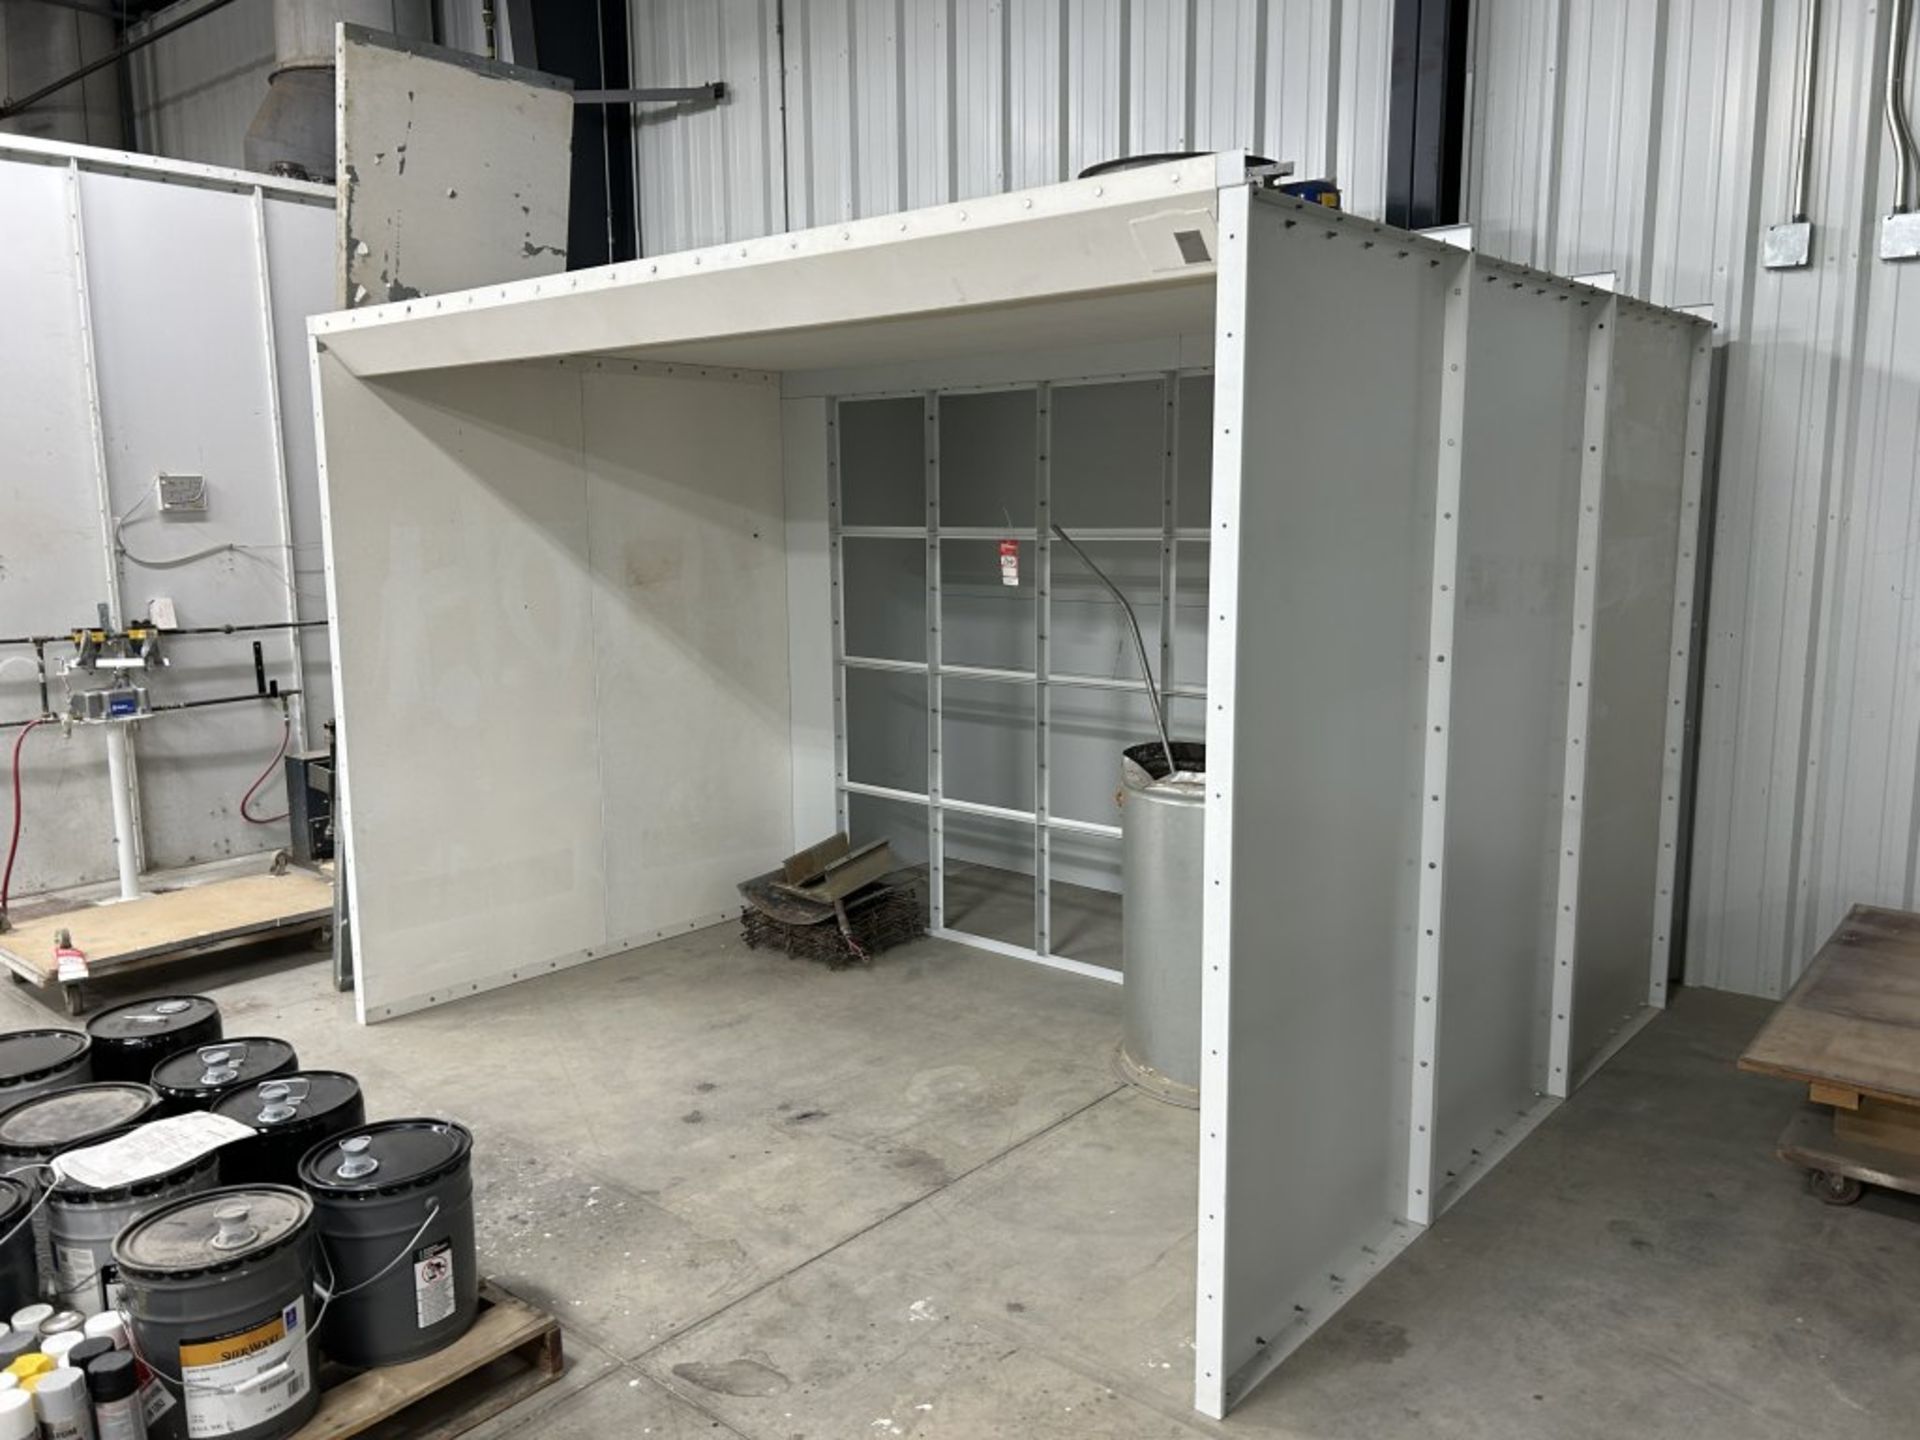 PAINT BOOTH, 10' X 9' X 86'', BUYER IS RESPONSIBLE FOR PROPER REMOVAL - Image 2 of 6